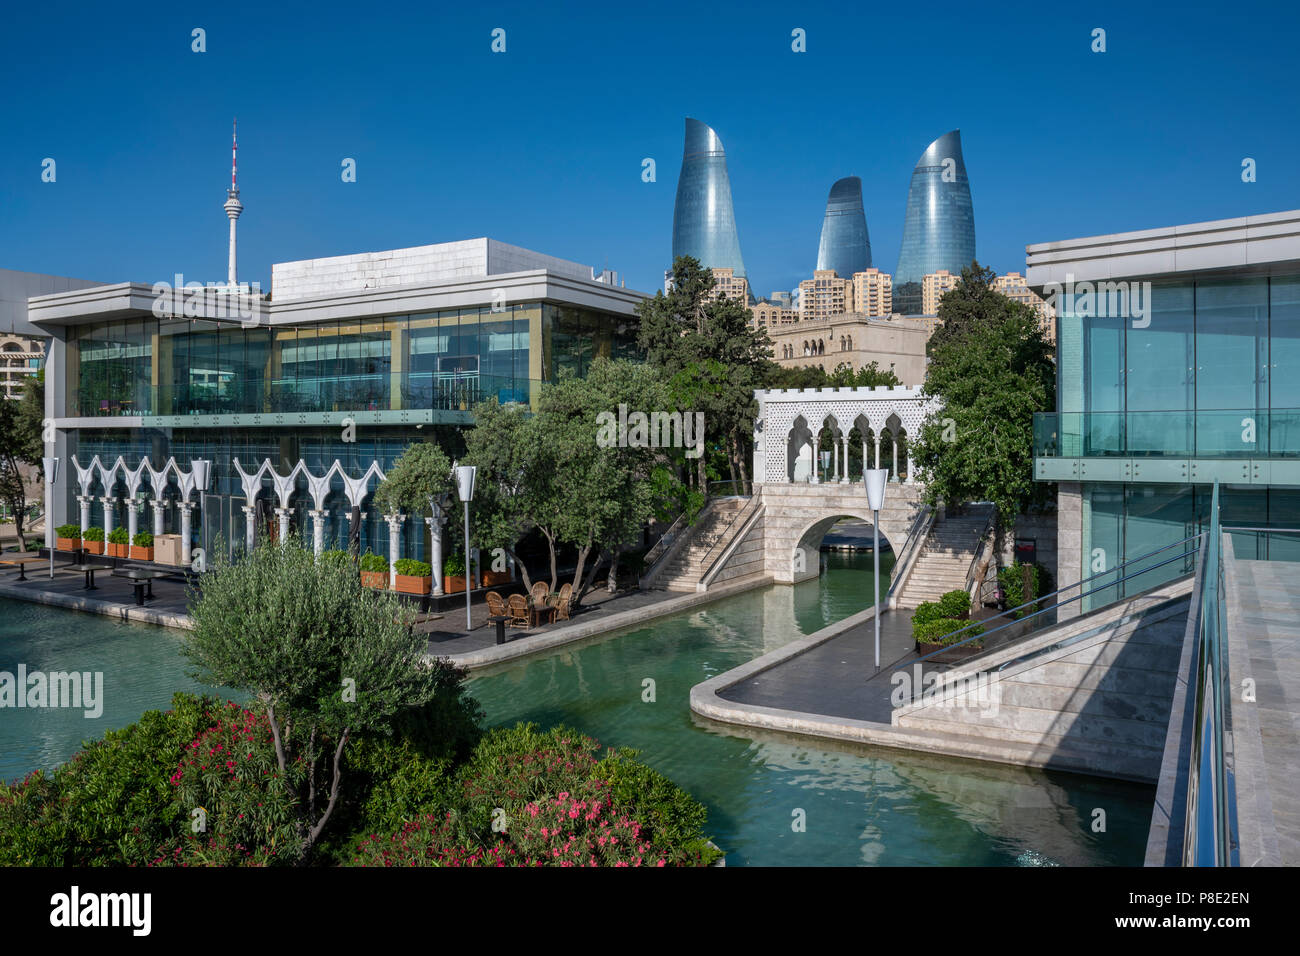 A view of the Flame Towers from Little Venice in Baku, Azerbaijan Stock Photo